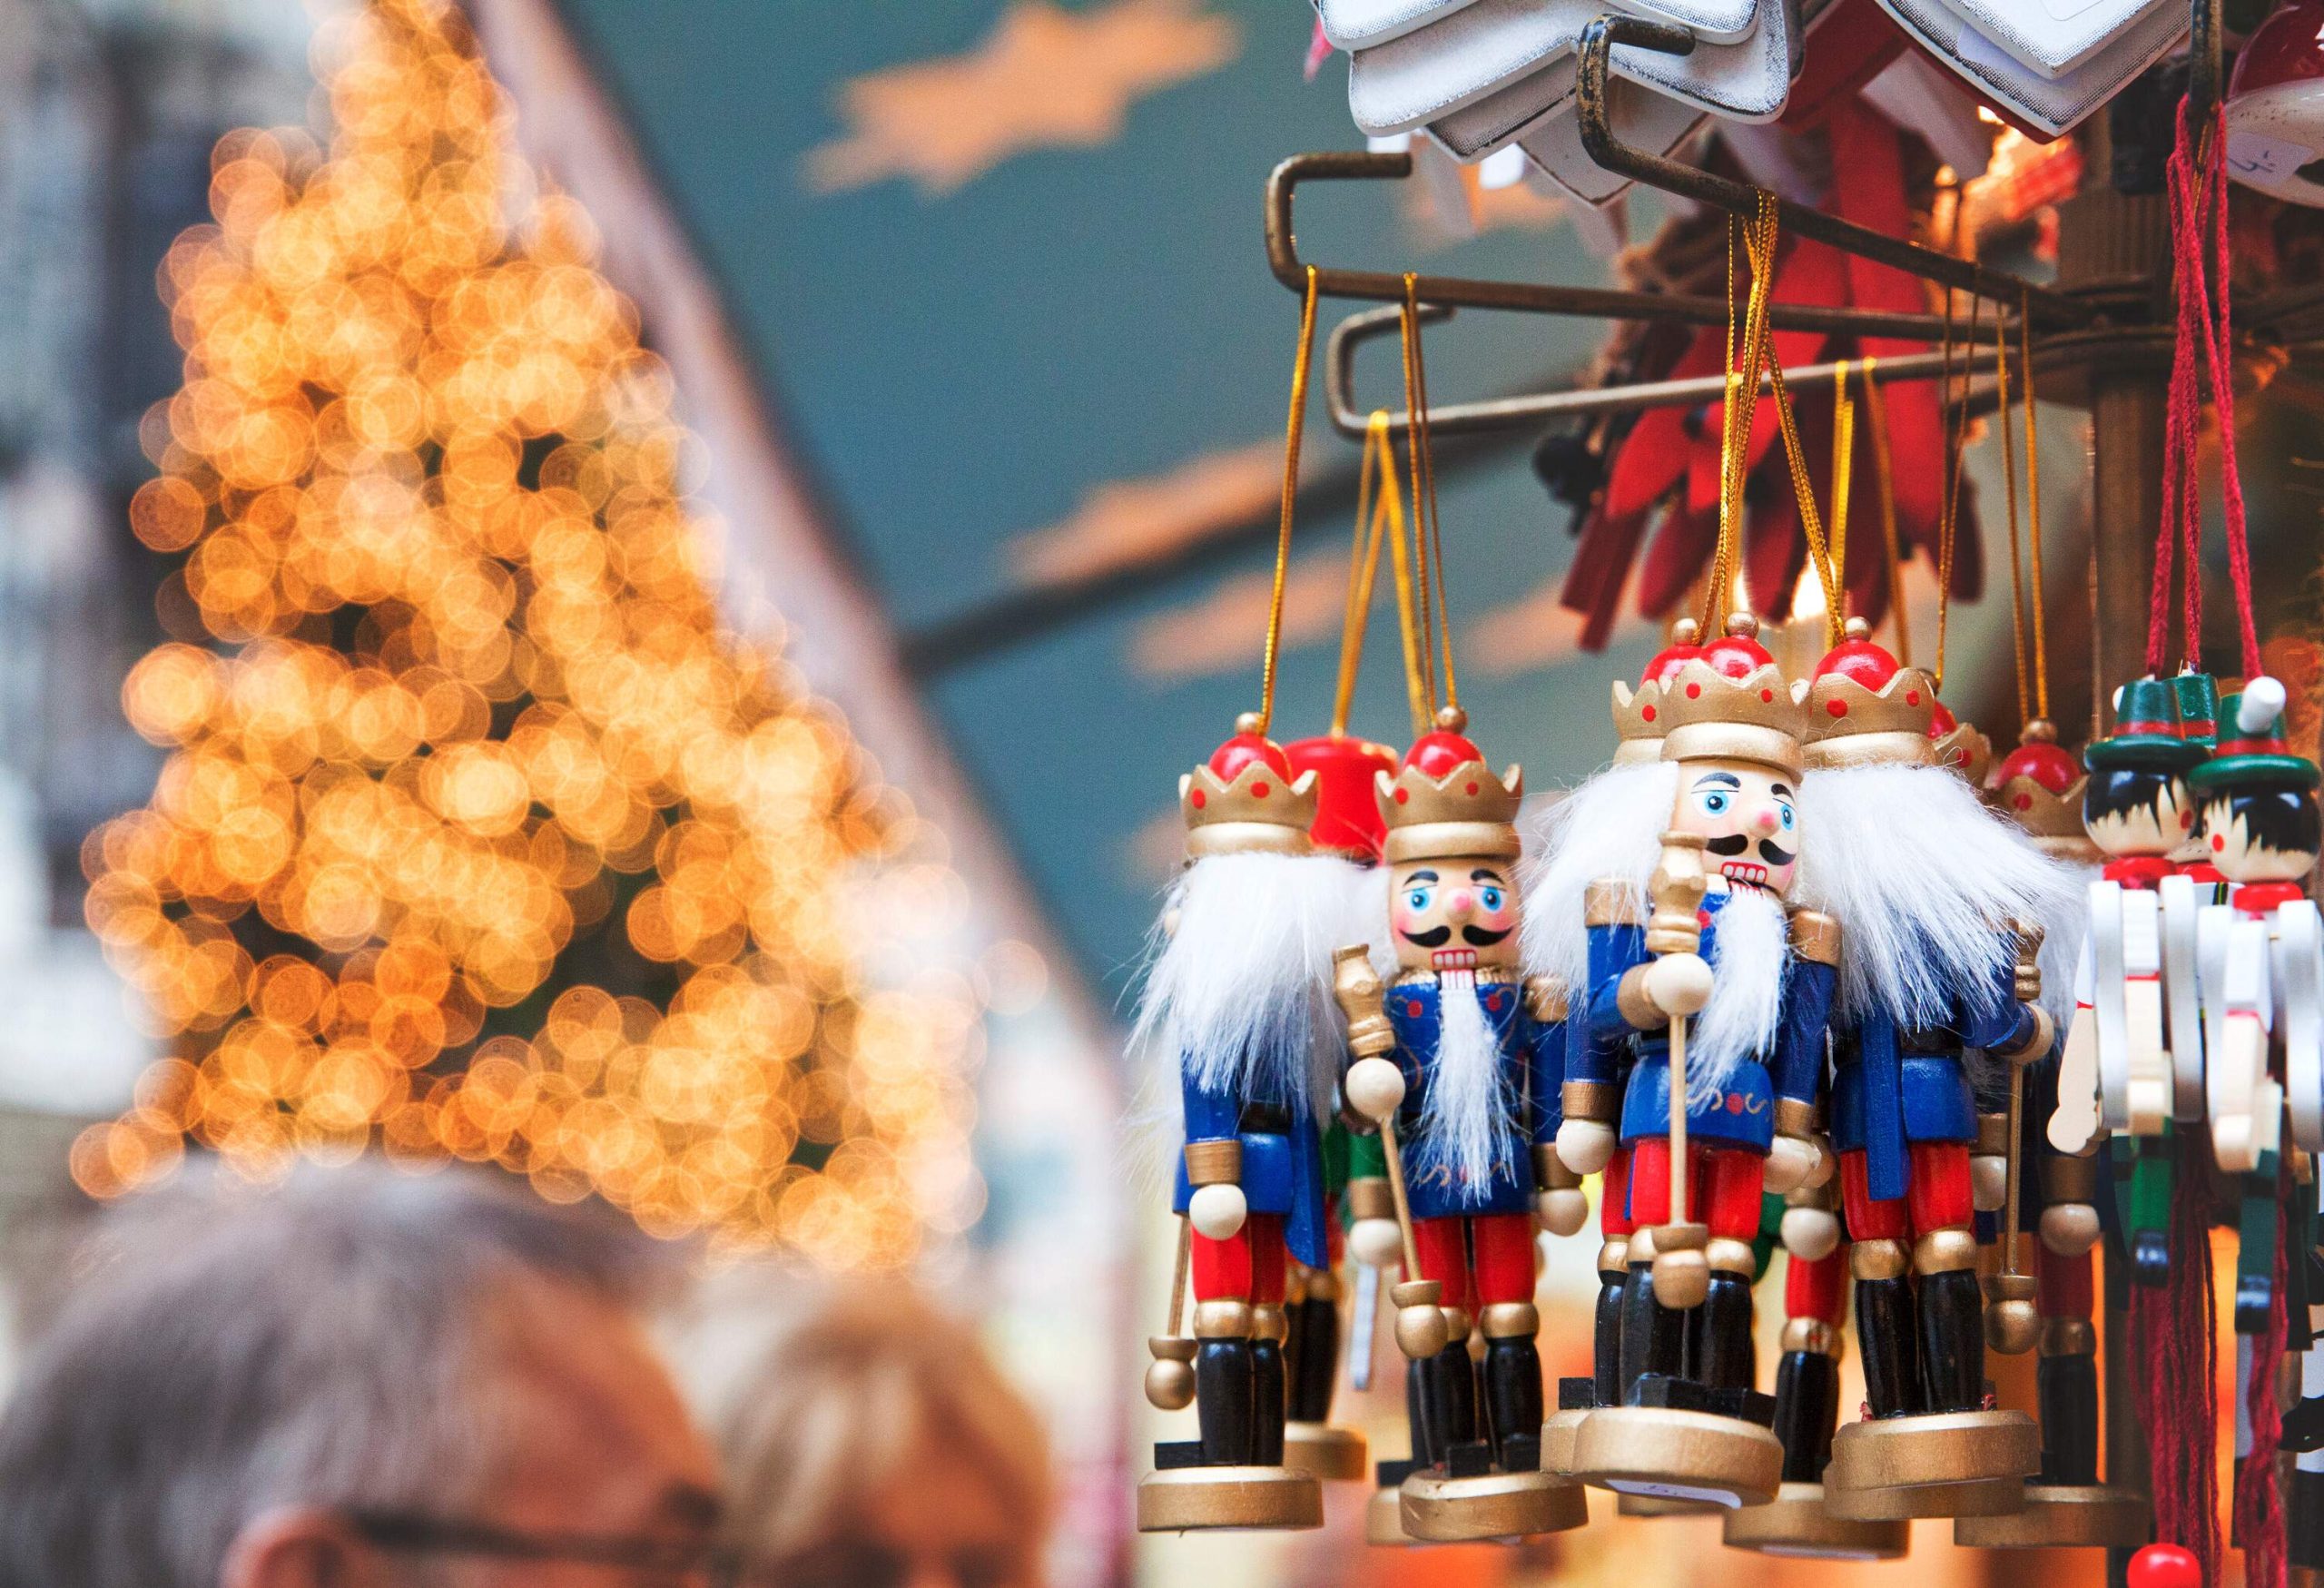 Toy souvenirs of a white-haired nutcrackers holding a baton on display.